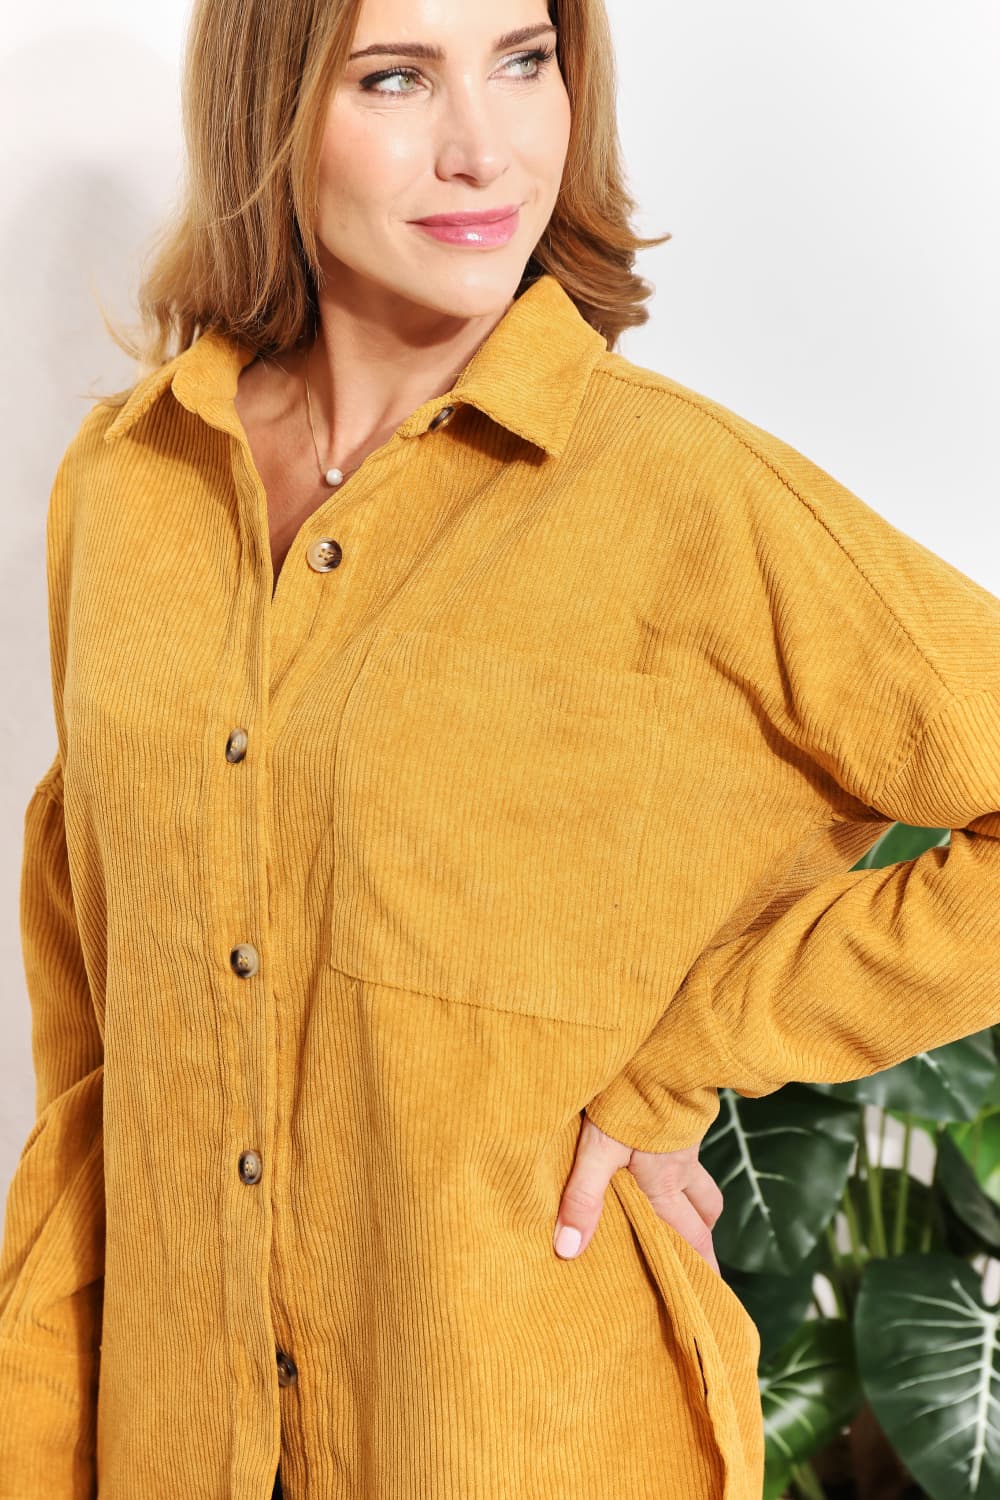 HEYSON Full Size Oversized Corduroy  Button-Down Tunic Shirt with Bust Pocket BLUE ZONE PLANET